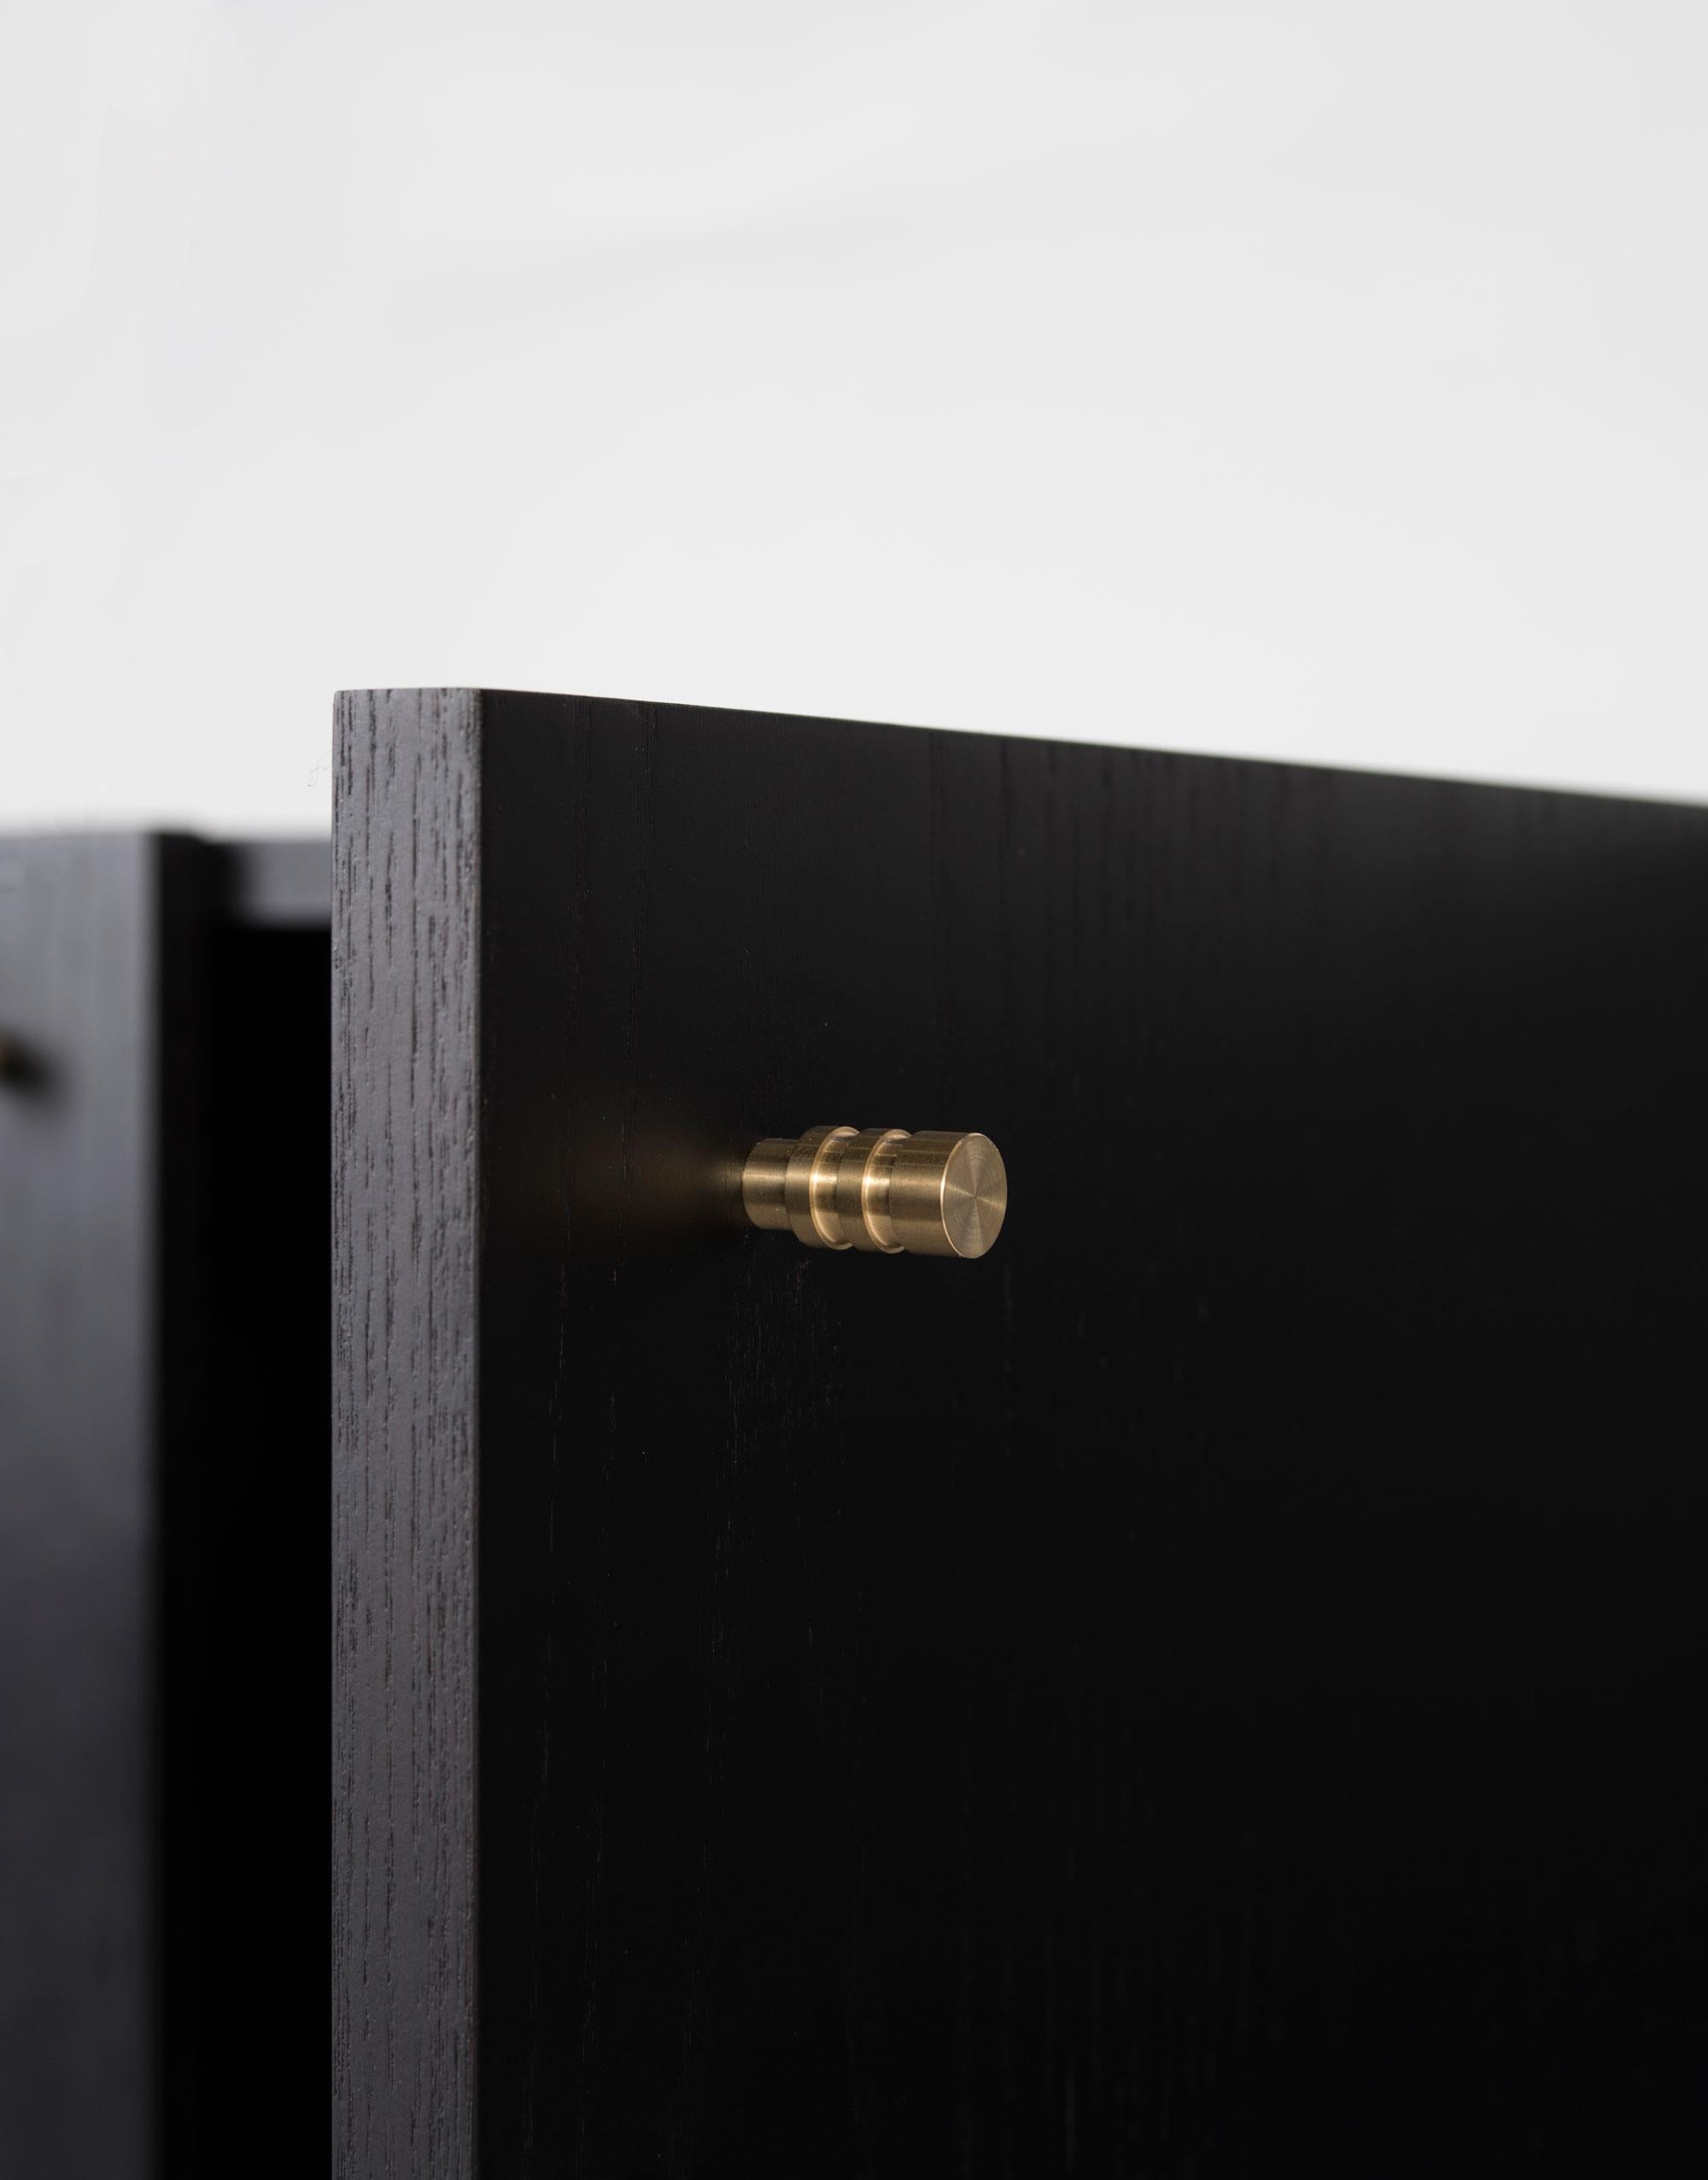 American Rex Credenza in Ebony Ash with Hand-Machined Brass Pulls and Mirror Compartment